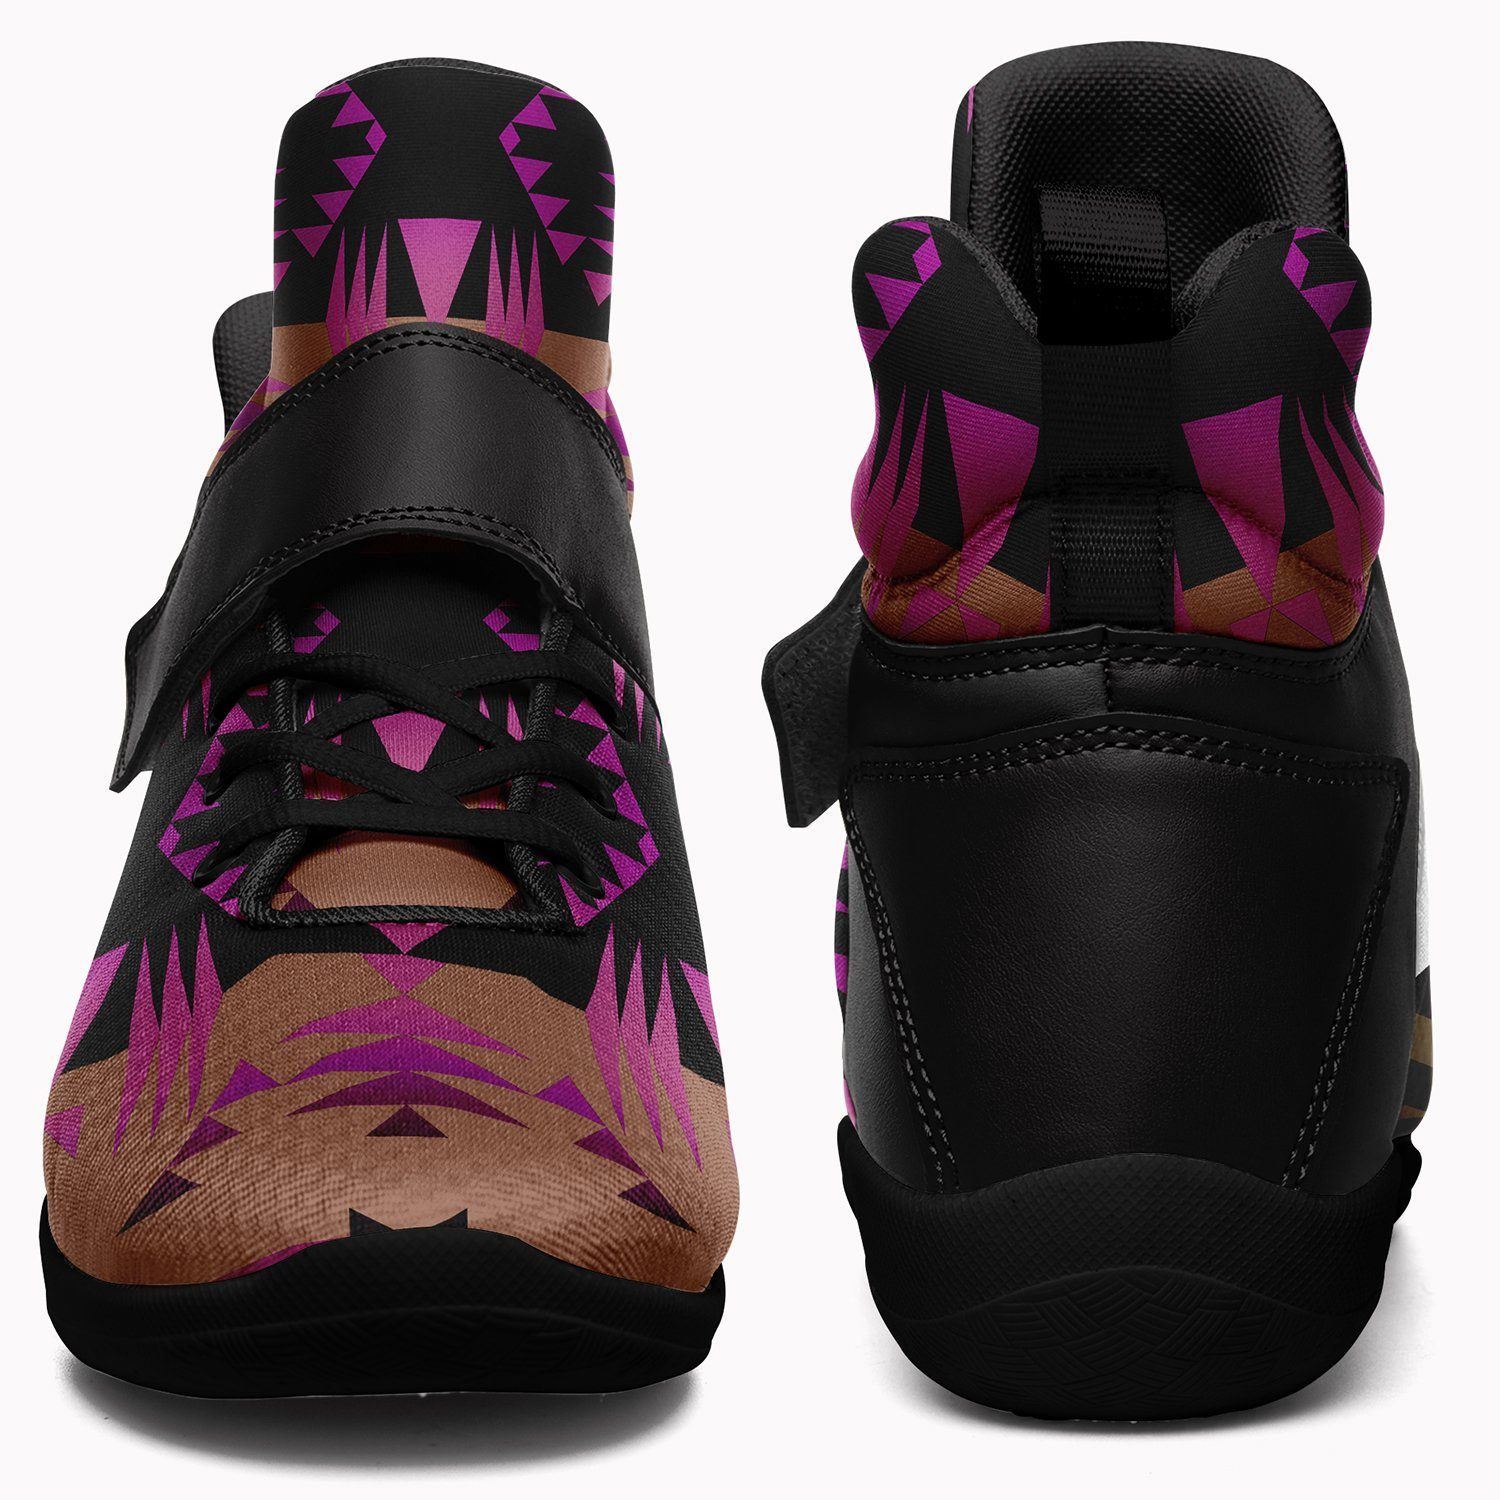 Between the Mountains Berry Ipottaa Basketball / Sport High Top Shoes - Black Sole 49 Dzine 